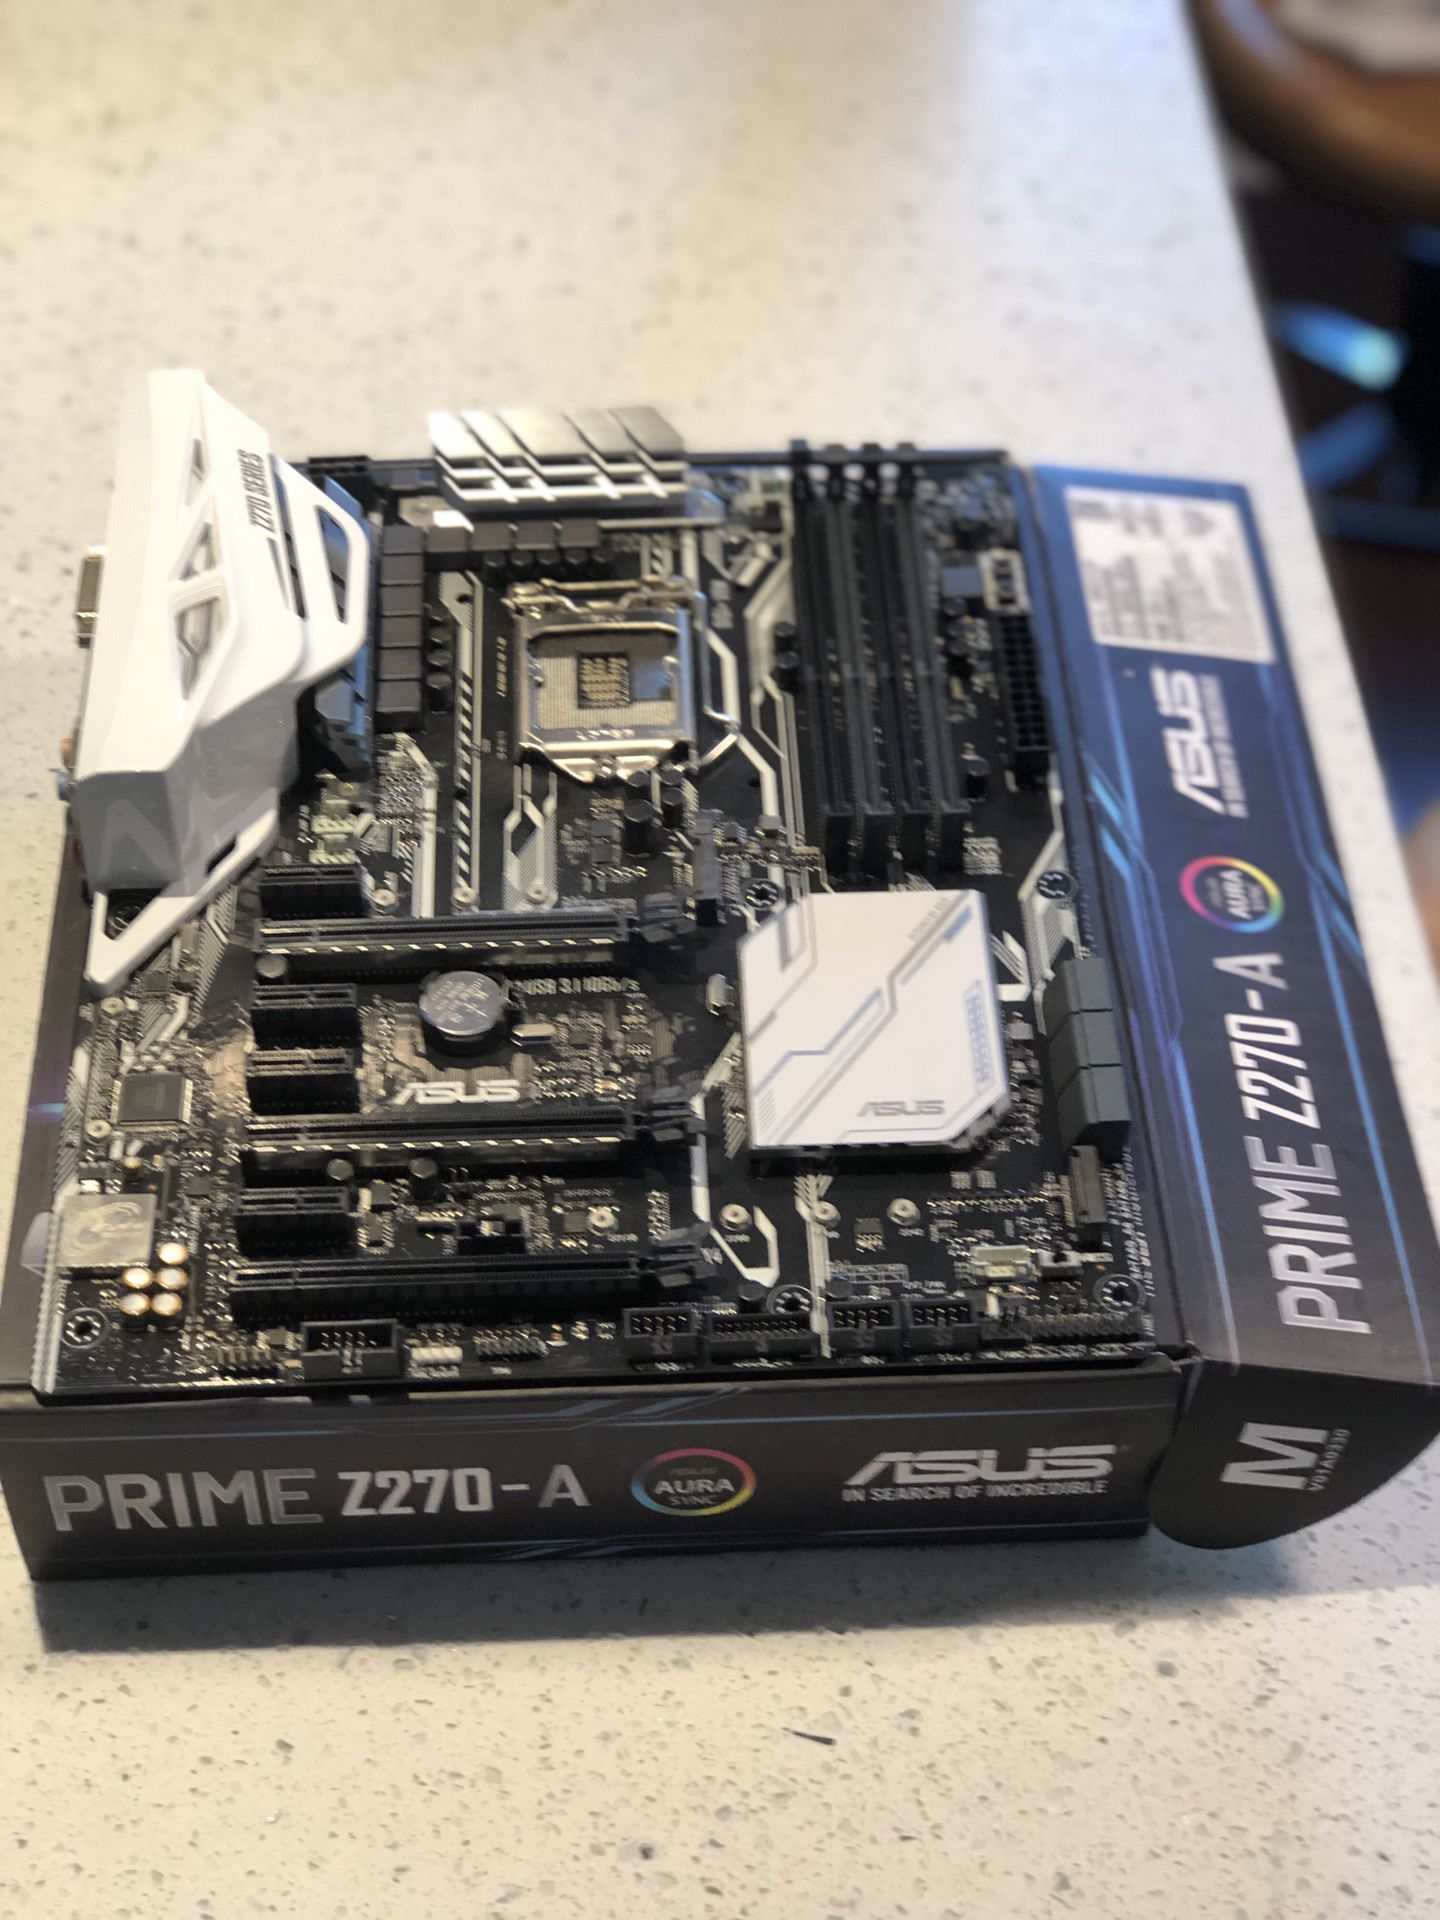 Asus z270A prime RGB 1151 mother board